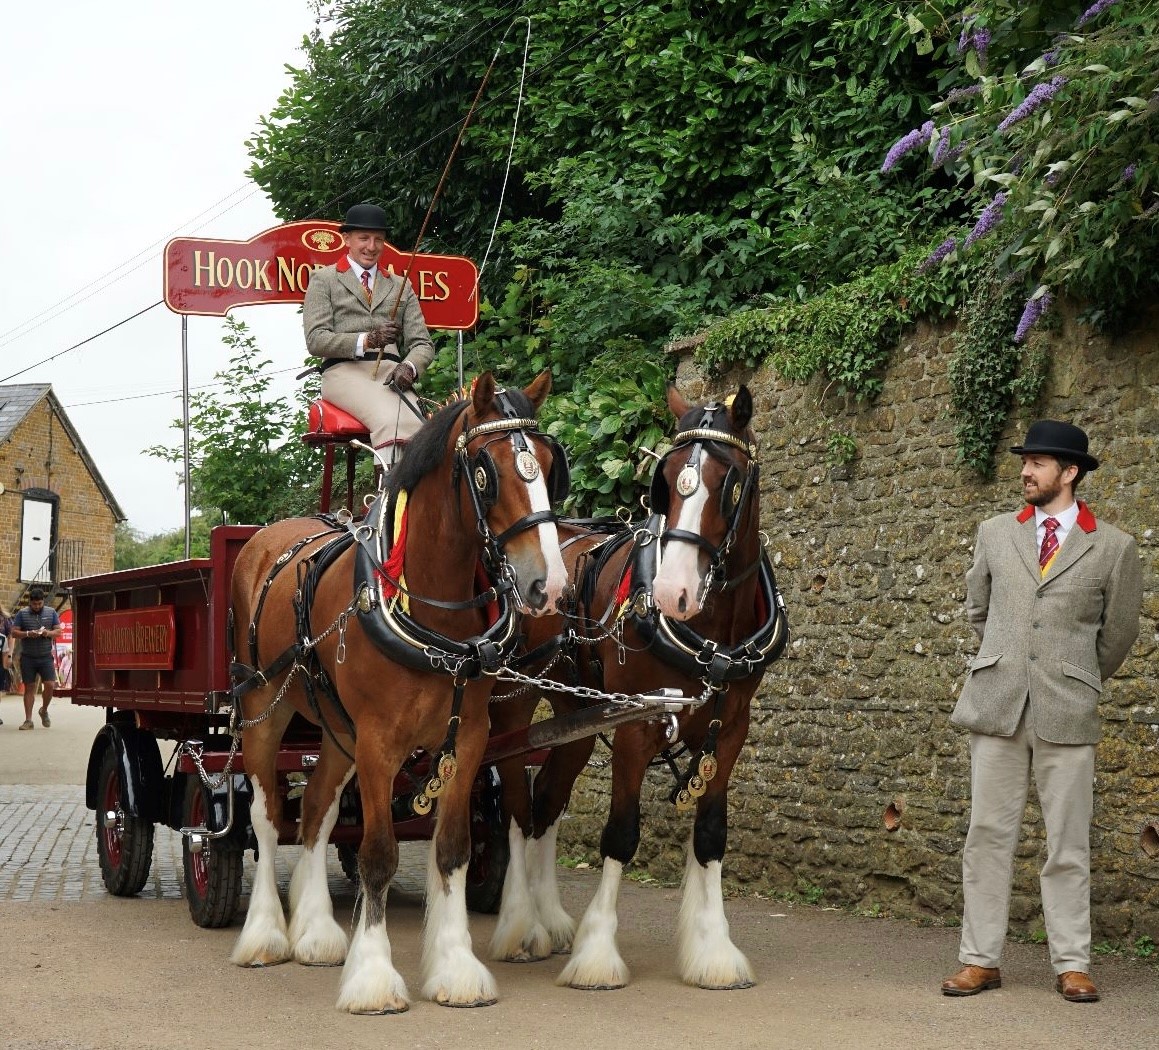 Annual Charity Carriage Parade returns to Hook Norton Brewery.